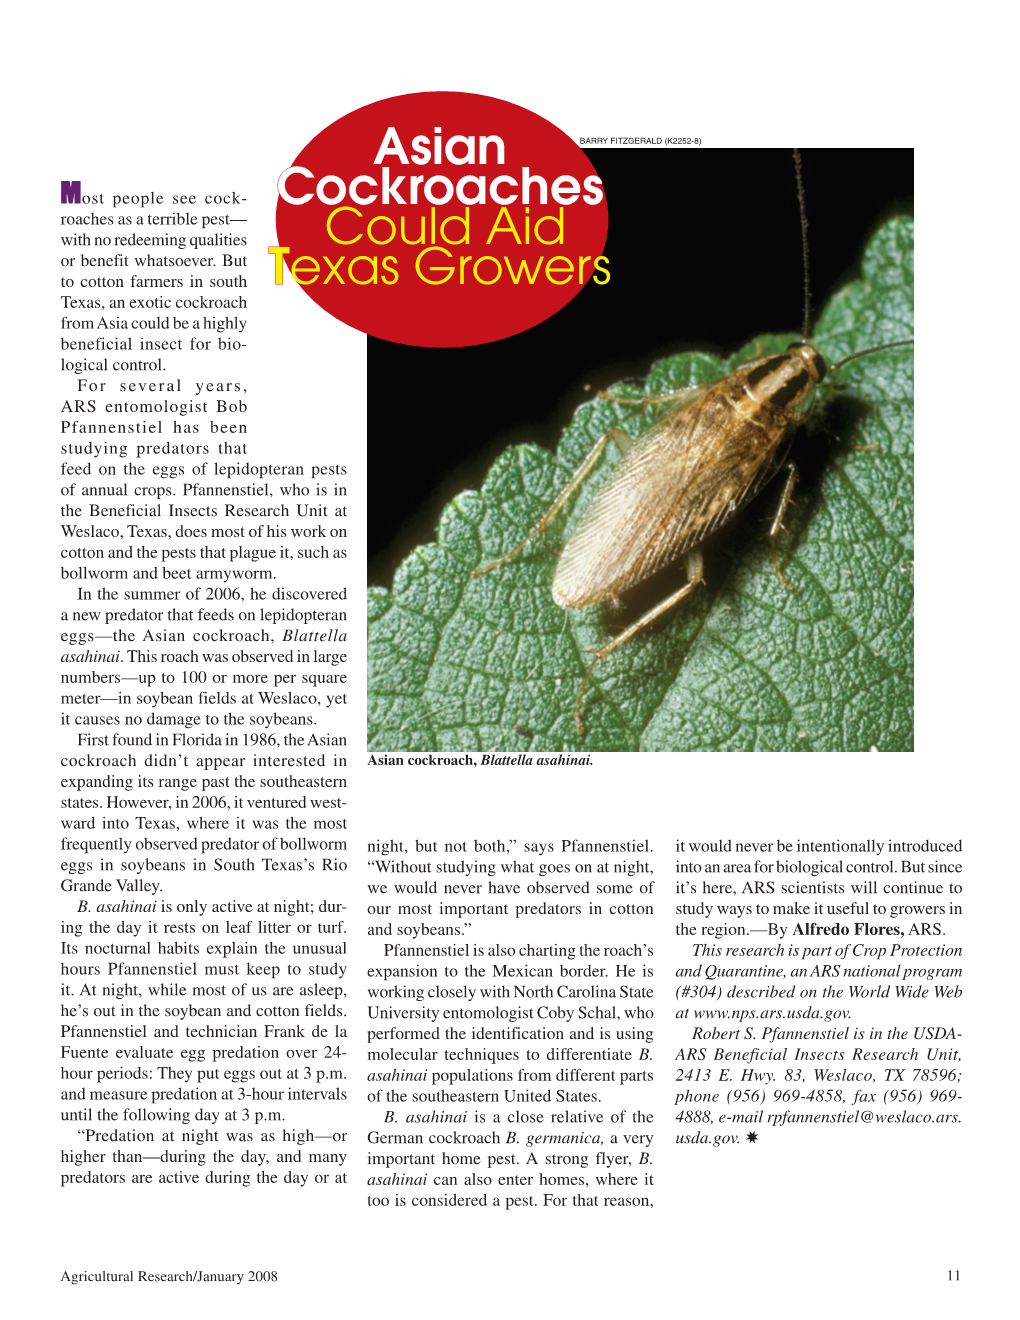 Asian Cockroaches Could Aid Texas Growers